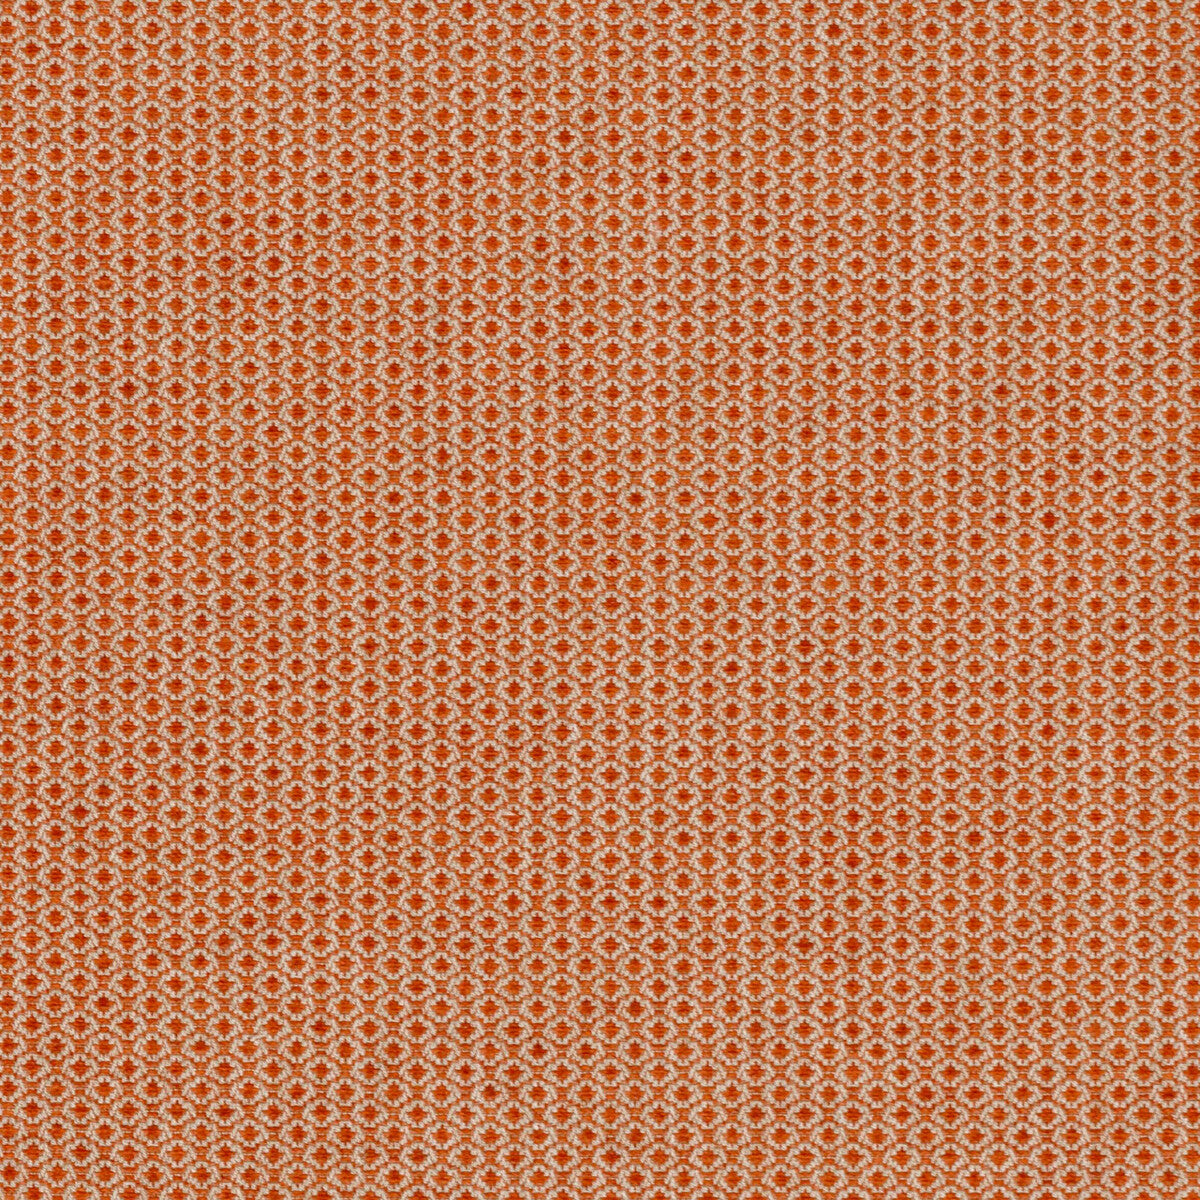 Cosgrove fabric in tangerine color - pattern BFC-3672.12.0 - by Lee Jofa in the Blithfield collection